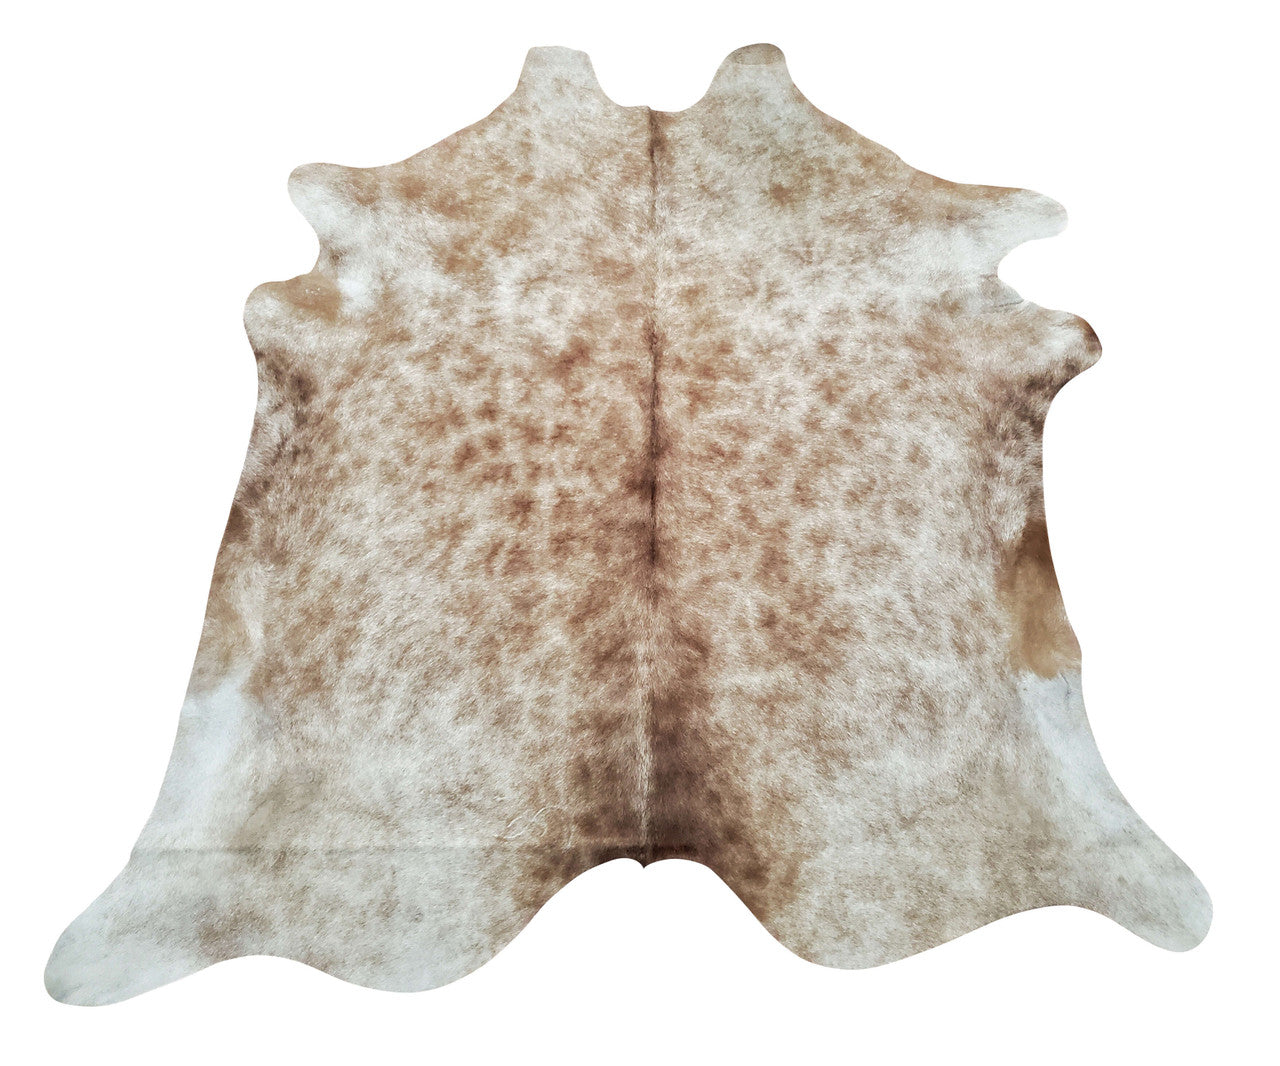 Cowhide rugs are extremely versatile and can be used in a variety of ways. They look great as floor coverings, wall hangings, or even thrown over furniture. No matter how you use them, cowhide rugs are sure to add a touch of luxury and style to your home.